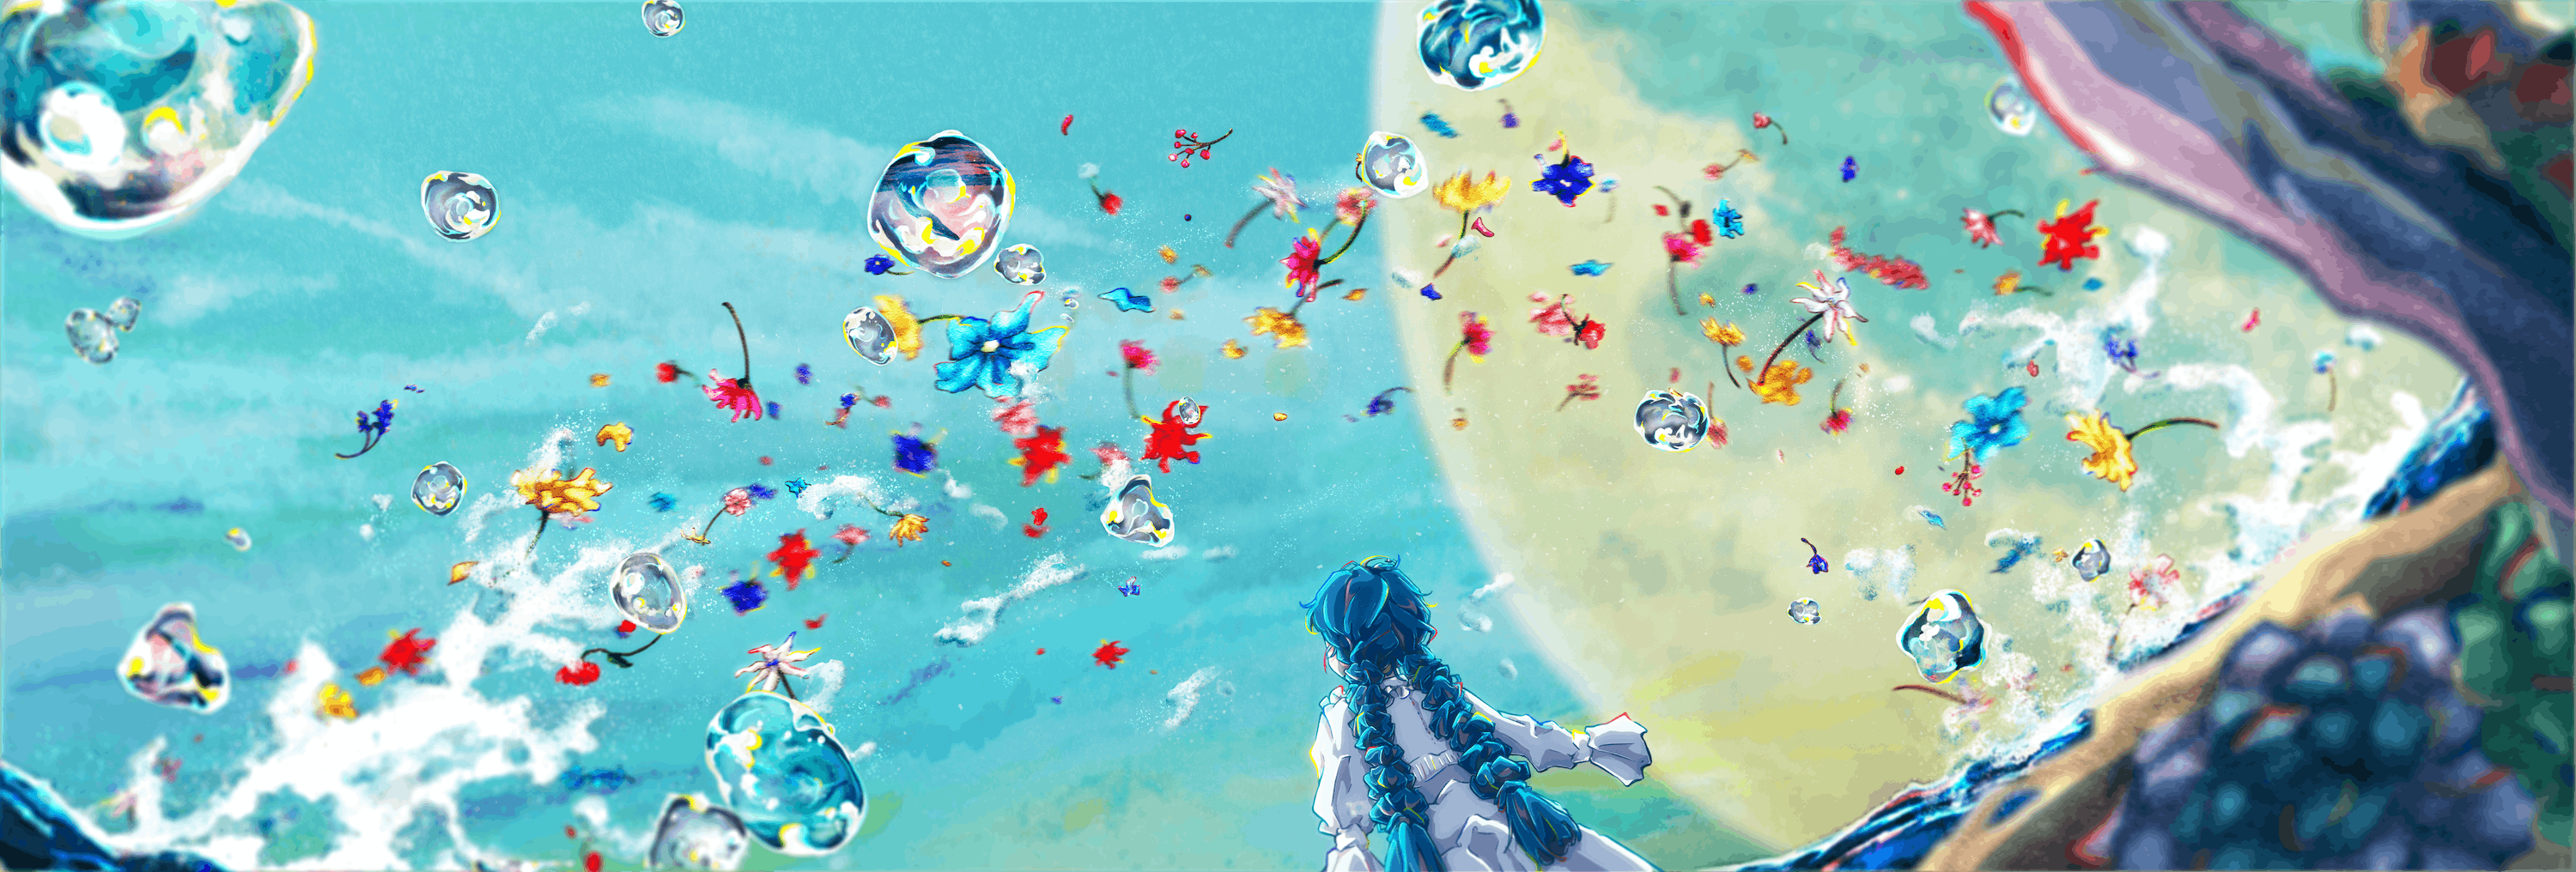 Anime 3000x1016 digital art artwork illustration anime flowers women anime girls abstract bubbles long hair blue hair twintails Moon water drops water braids